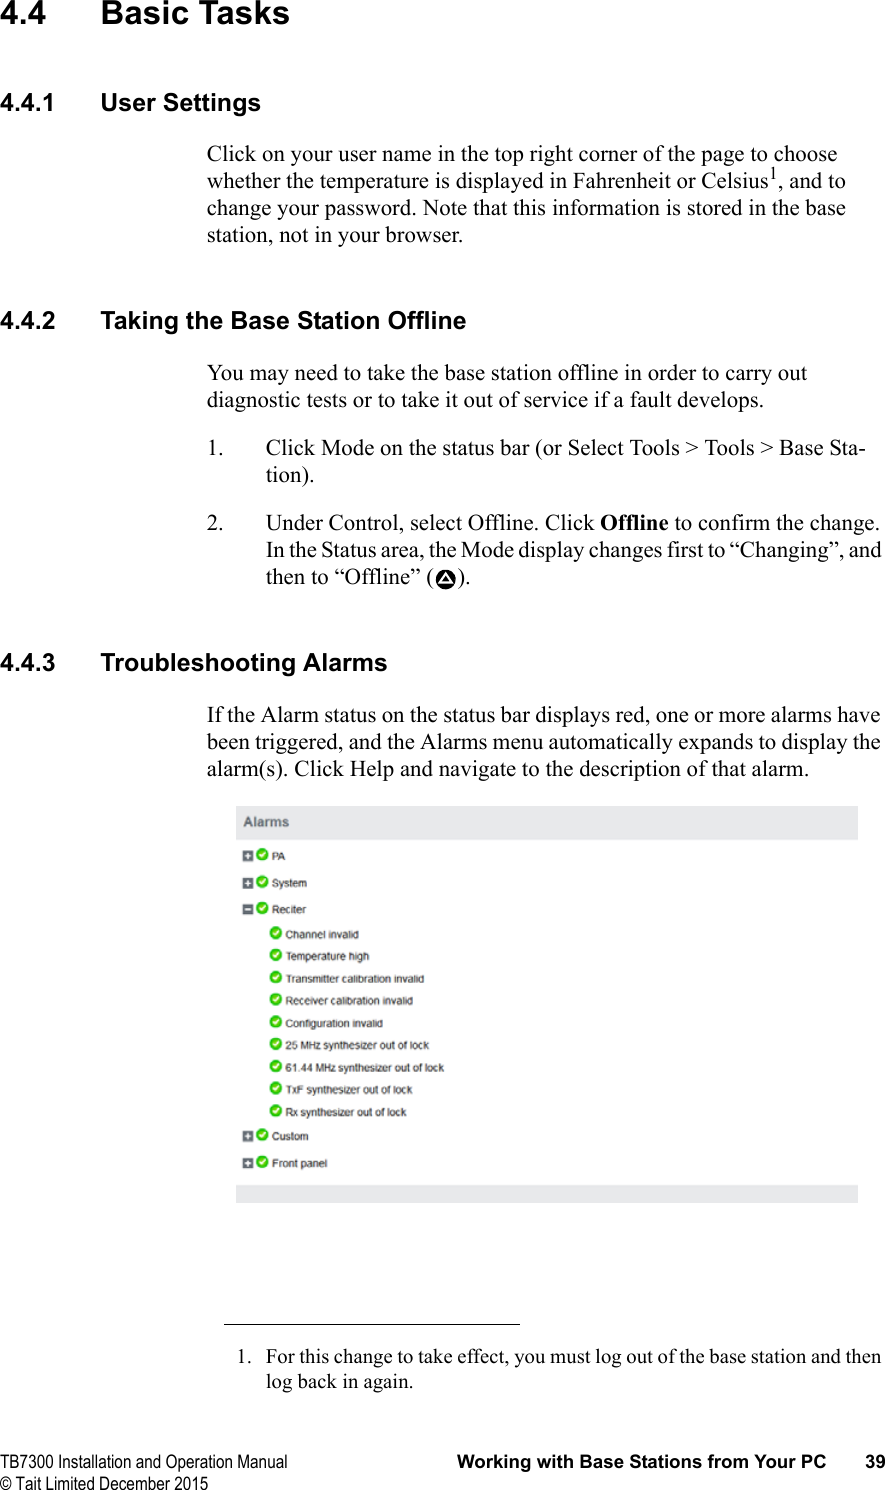  TB7300 Installation and Operation Manual Working with Base Stations from Your PC 39© Tait Limited December 20154.4 Basic Tasks4.4.1 User SettingsClick on your user name in the top right corner of the page to choose whether the temperature is displayed in Fahrenheit or Celsius1, and to change your password. Note that this information is stored in the base station, not in your browser.4.4.2 Taking the Base Station OfflineYou may need to take the base station offline in order to carry out diagnostic tests or to take it out of service if a fault develops.1. Click Mode on the status bar (or Select Tools &gt; Tools &gt; Base Sta-tion).2. Under Control, select Offline. Click Offline to confirm the change. In the Status area, the Mode display changes first to “Changing”, and then to “Offline” ( ).4.4.3 Troubleshooting AlarmsIf the Alarm status on the status bar displays red, one or more alarms have been triggered, and the Alarms menu automatically expands to display the alarm(s). Click Help and navigate to the description of that alarm. 1. For this change to take effect, you must log out of the base station and then log back in again.